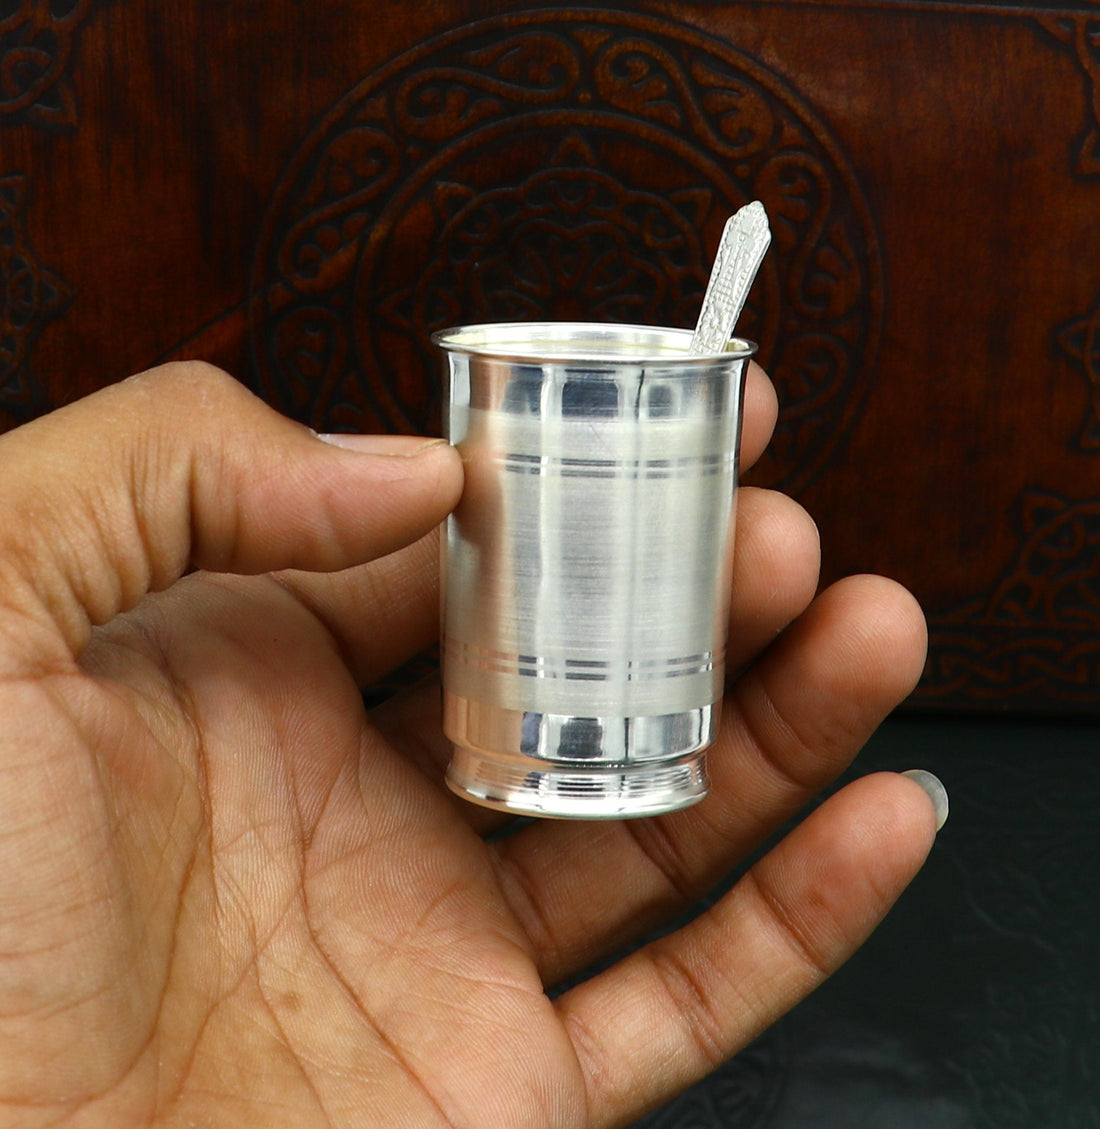 999 fine silver handmade water/milk Glass tumbler, silver flask, baby kids silver cup & spoon utensils for stay healthy from bacteria sv155 - TRIBAL ORNAMENTS